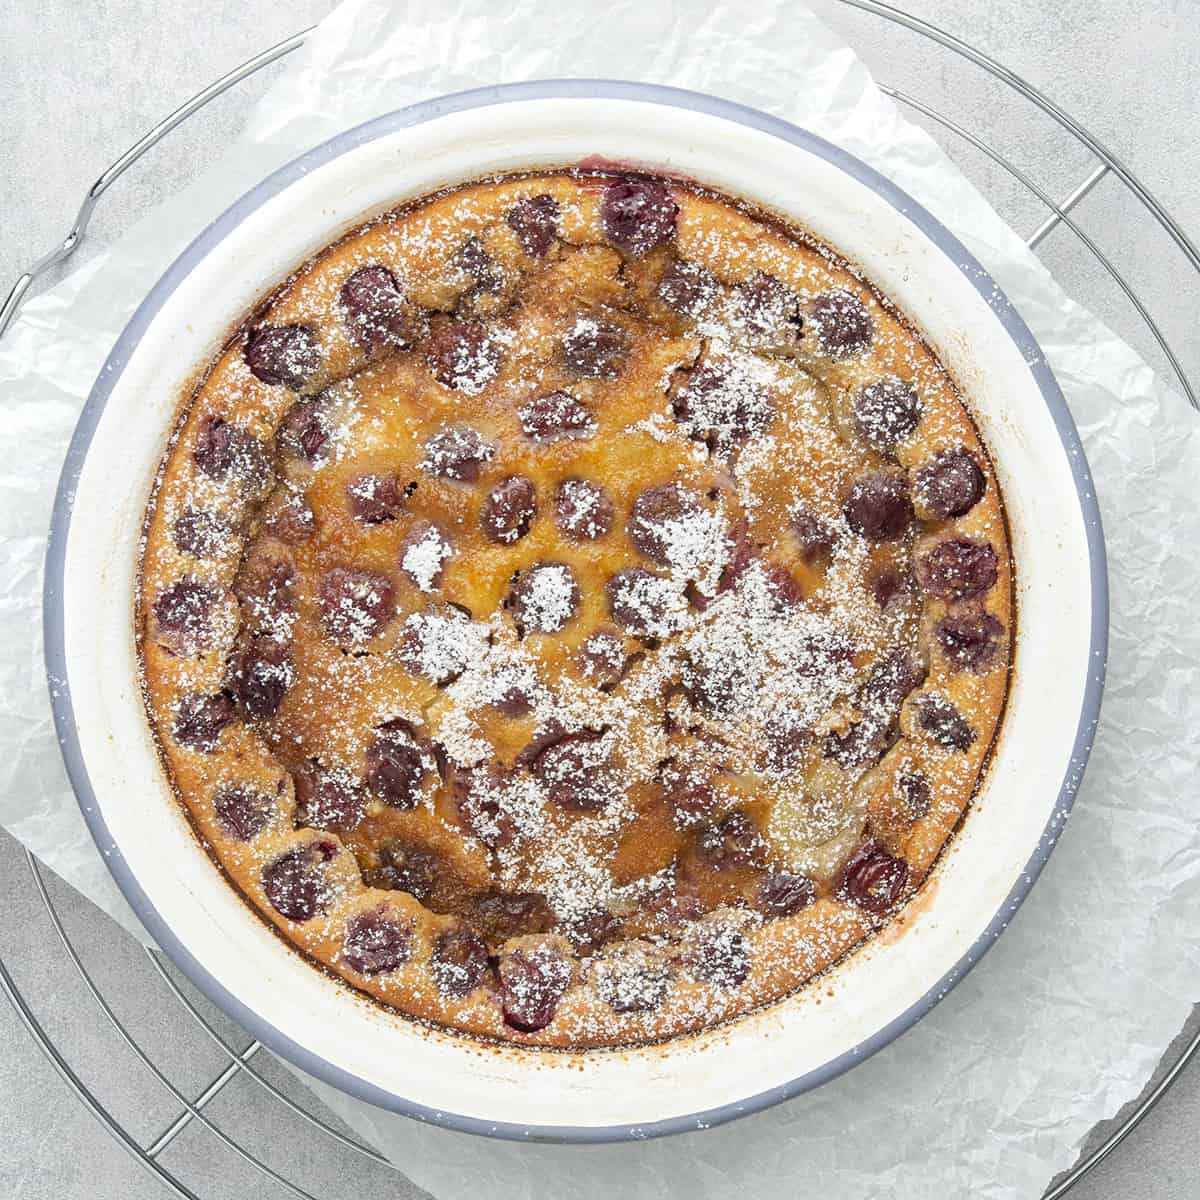 <p><a href="https://www.spatuladesserts.com/clafoutis/">Clafoutis</a>, this classic French dessert is the ultimate flan-like recipe that comes together really quickly and easily! It has a custard-like creamy texture and can be made with a great variety of fruits, eg. berries, cherry, apple, etc. This is a rustic dessert, with a homemade comfort food vibe, and probably one of the easiest recipes on the list!</p>